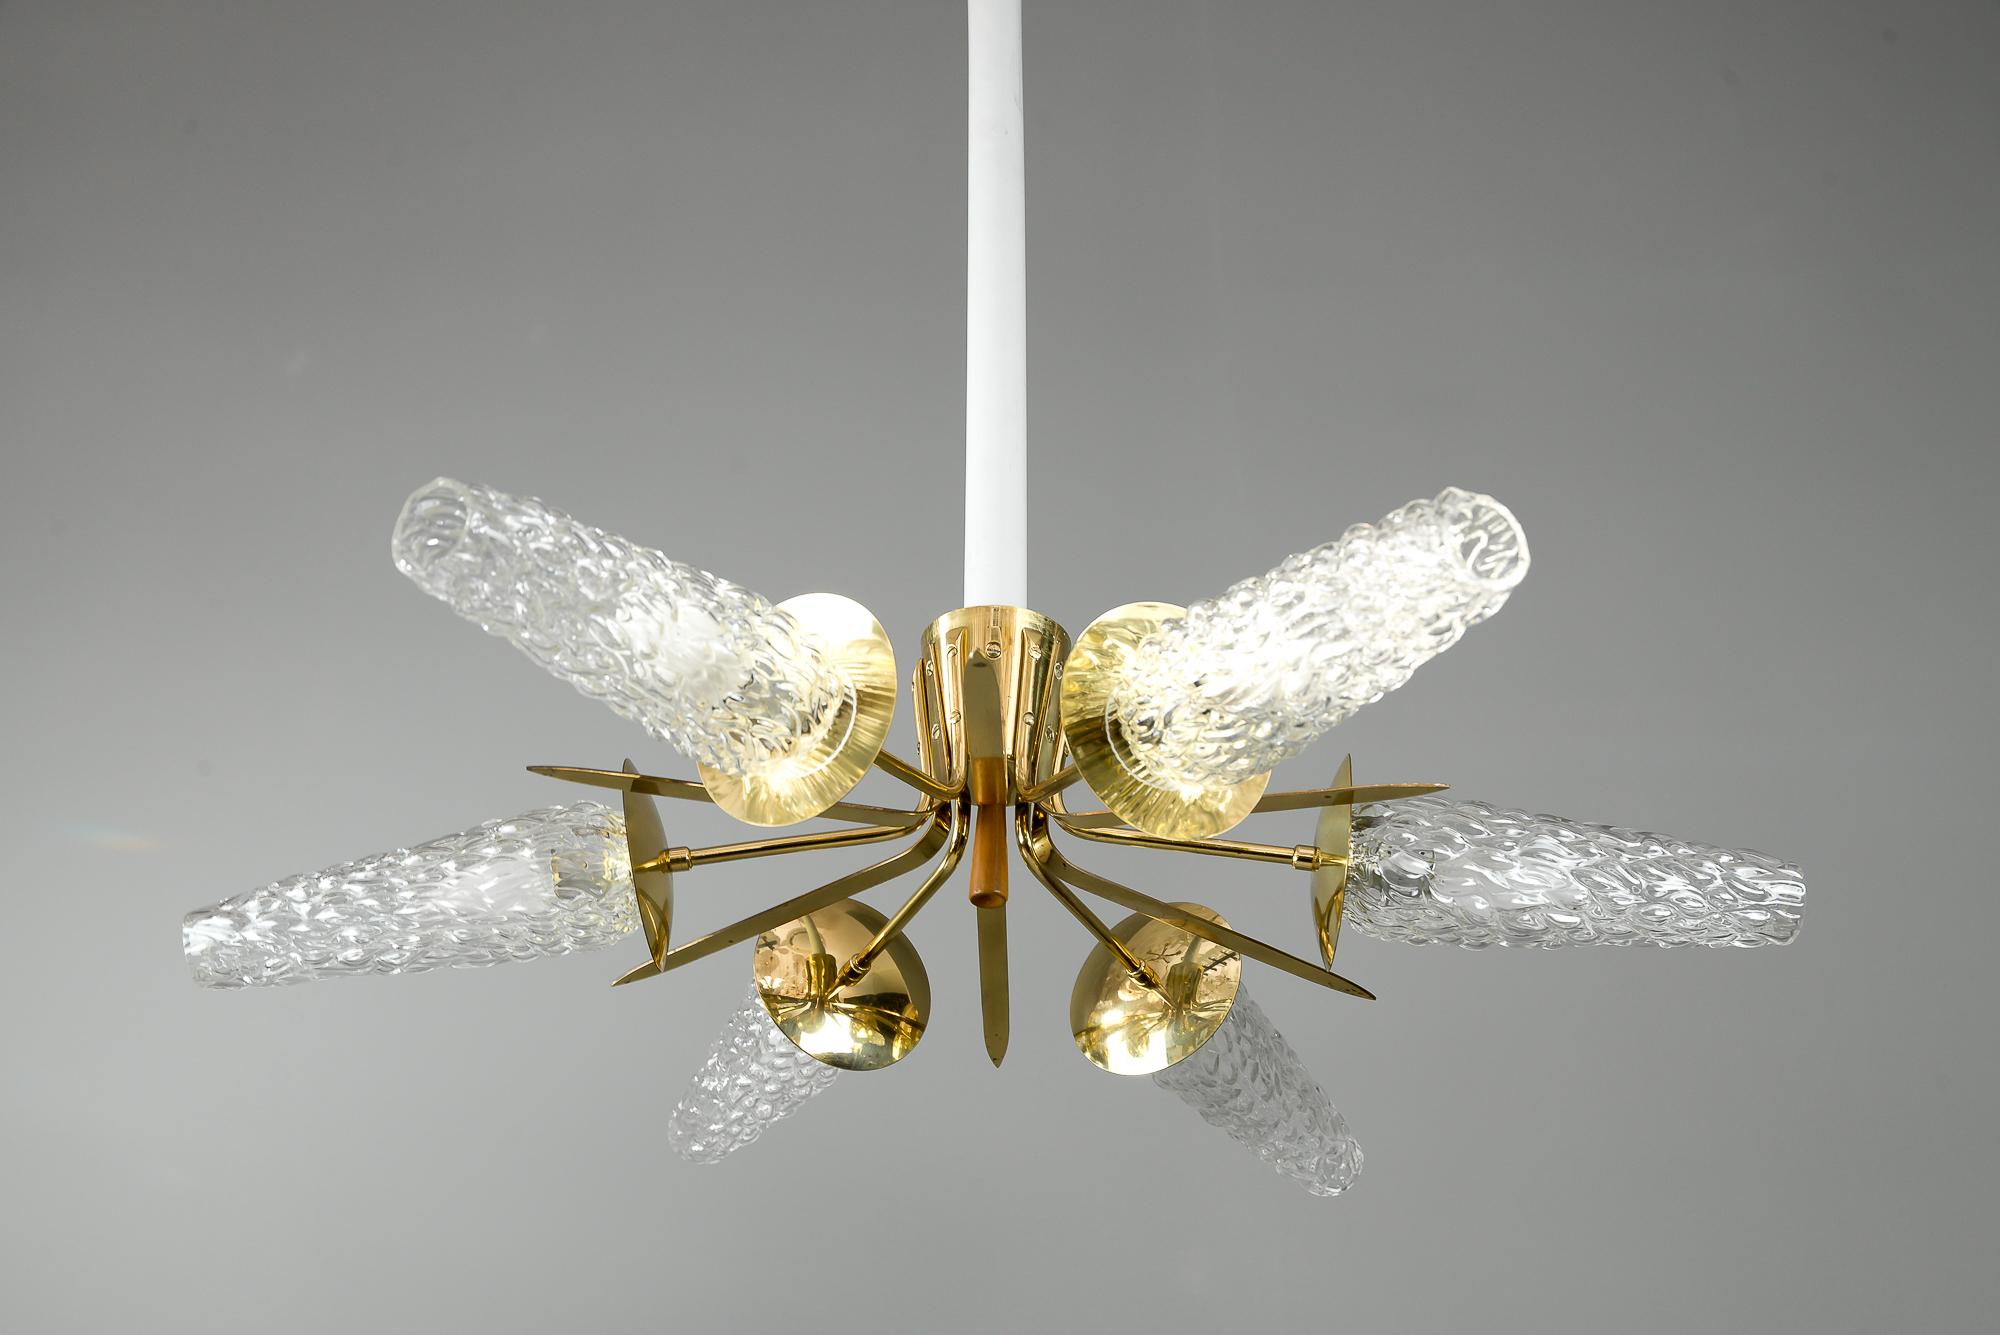 Rupert Nikoll Sputnik chandelier circa 1950s
Original condition
Original glass.
we have a second one, it is not includet with this one.